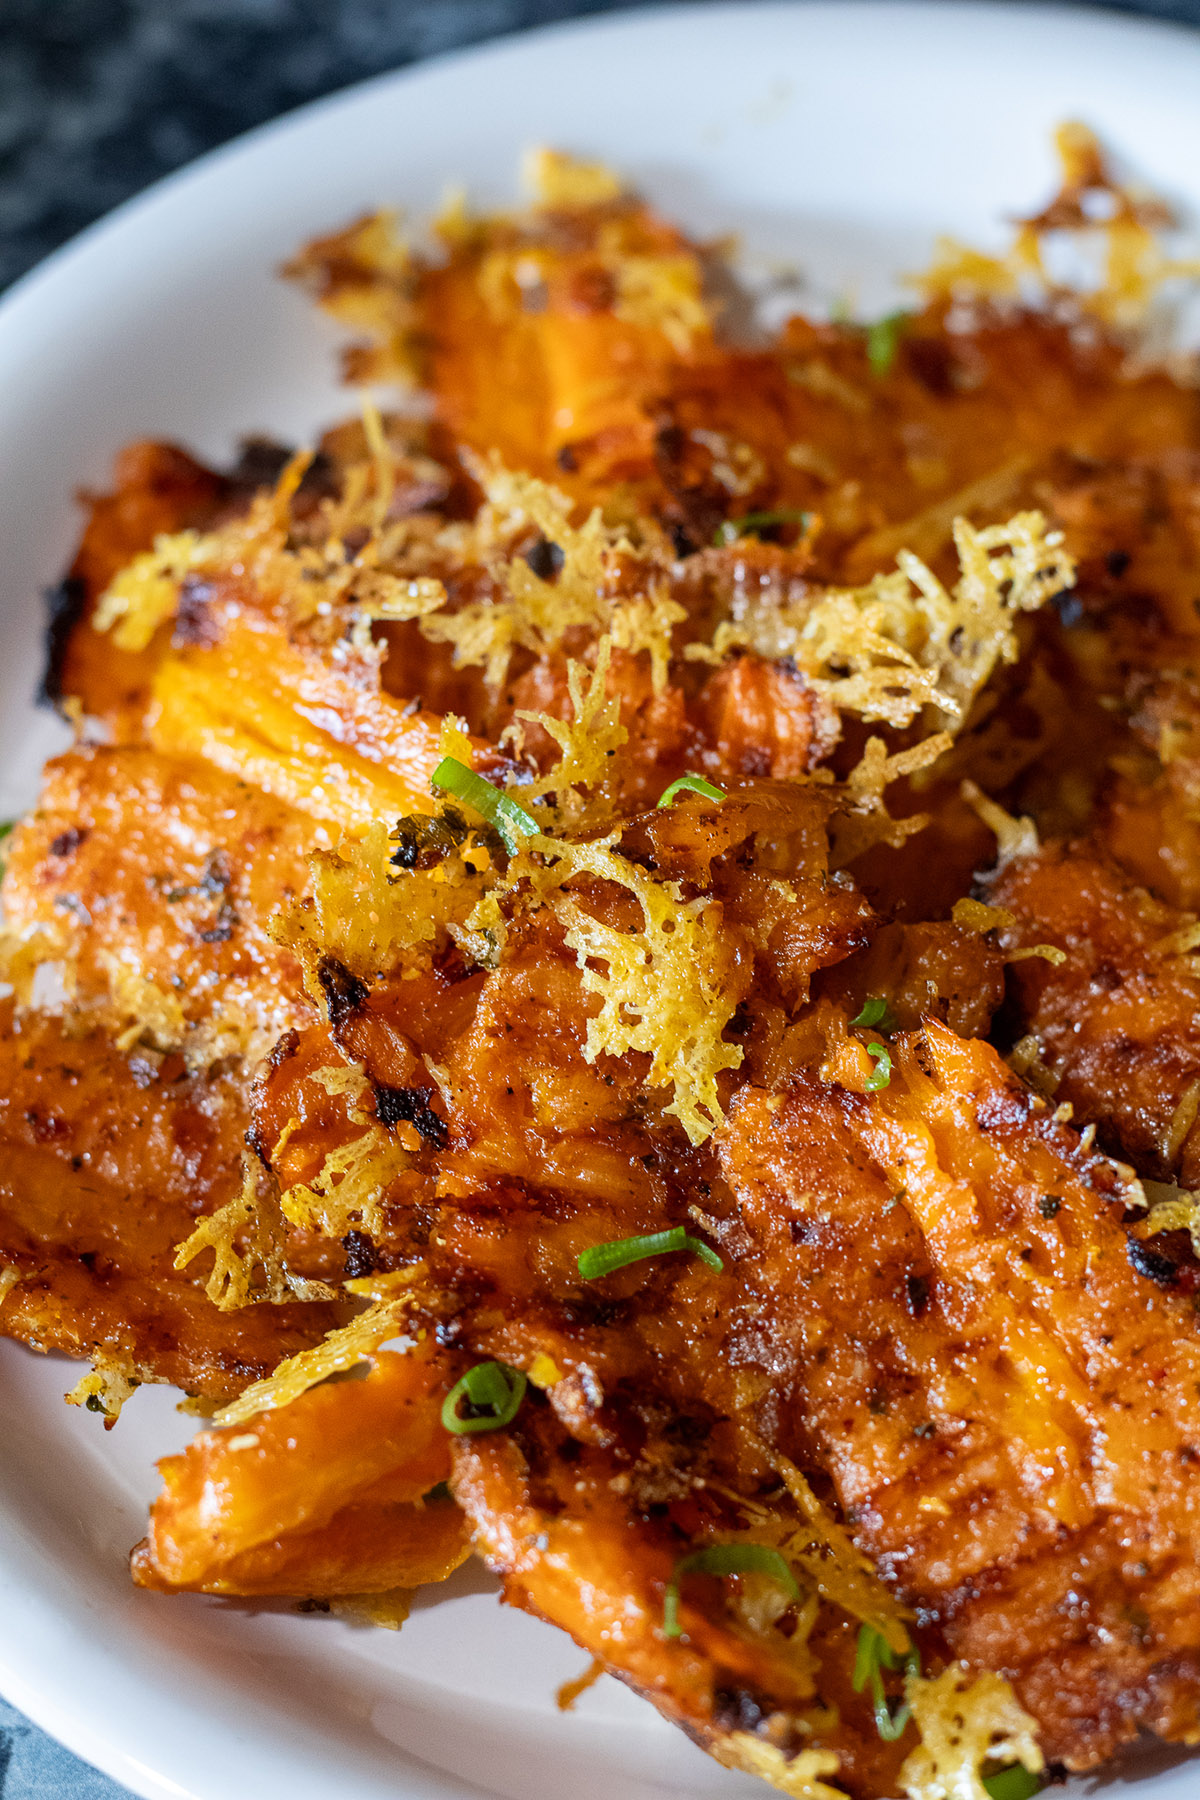 Roasted smashed carrots with parmesan cheese.